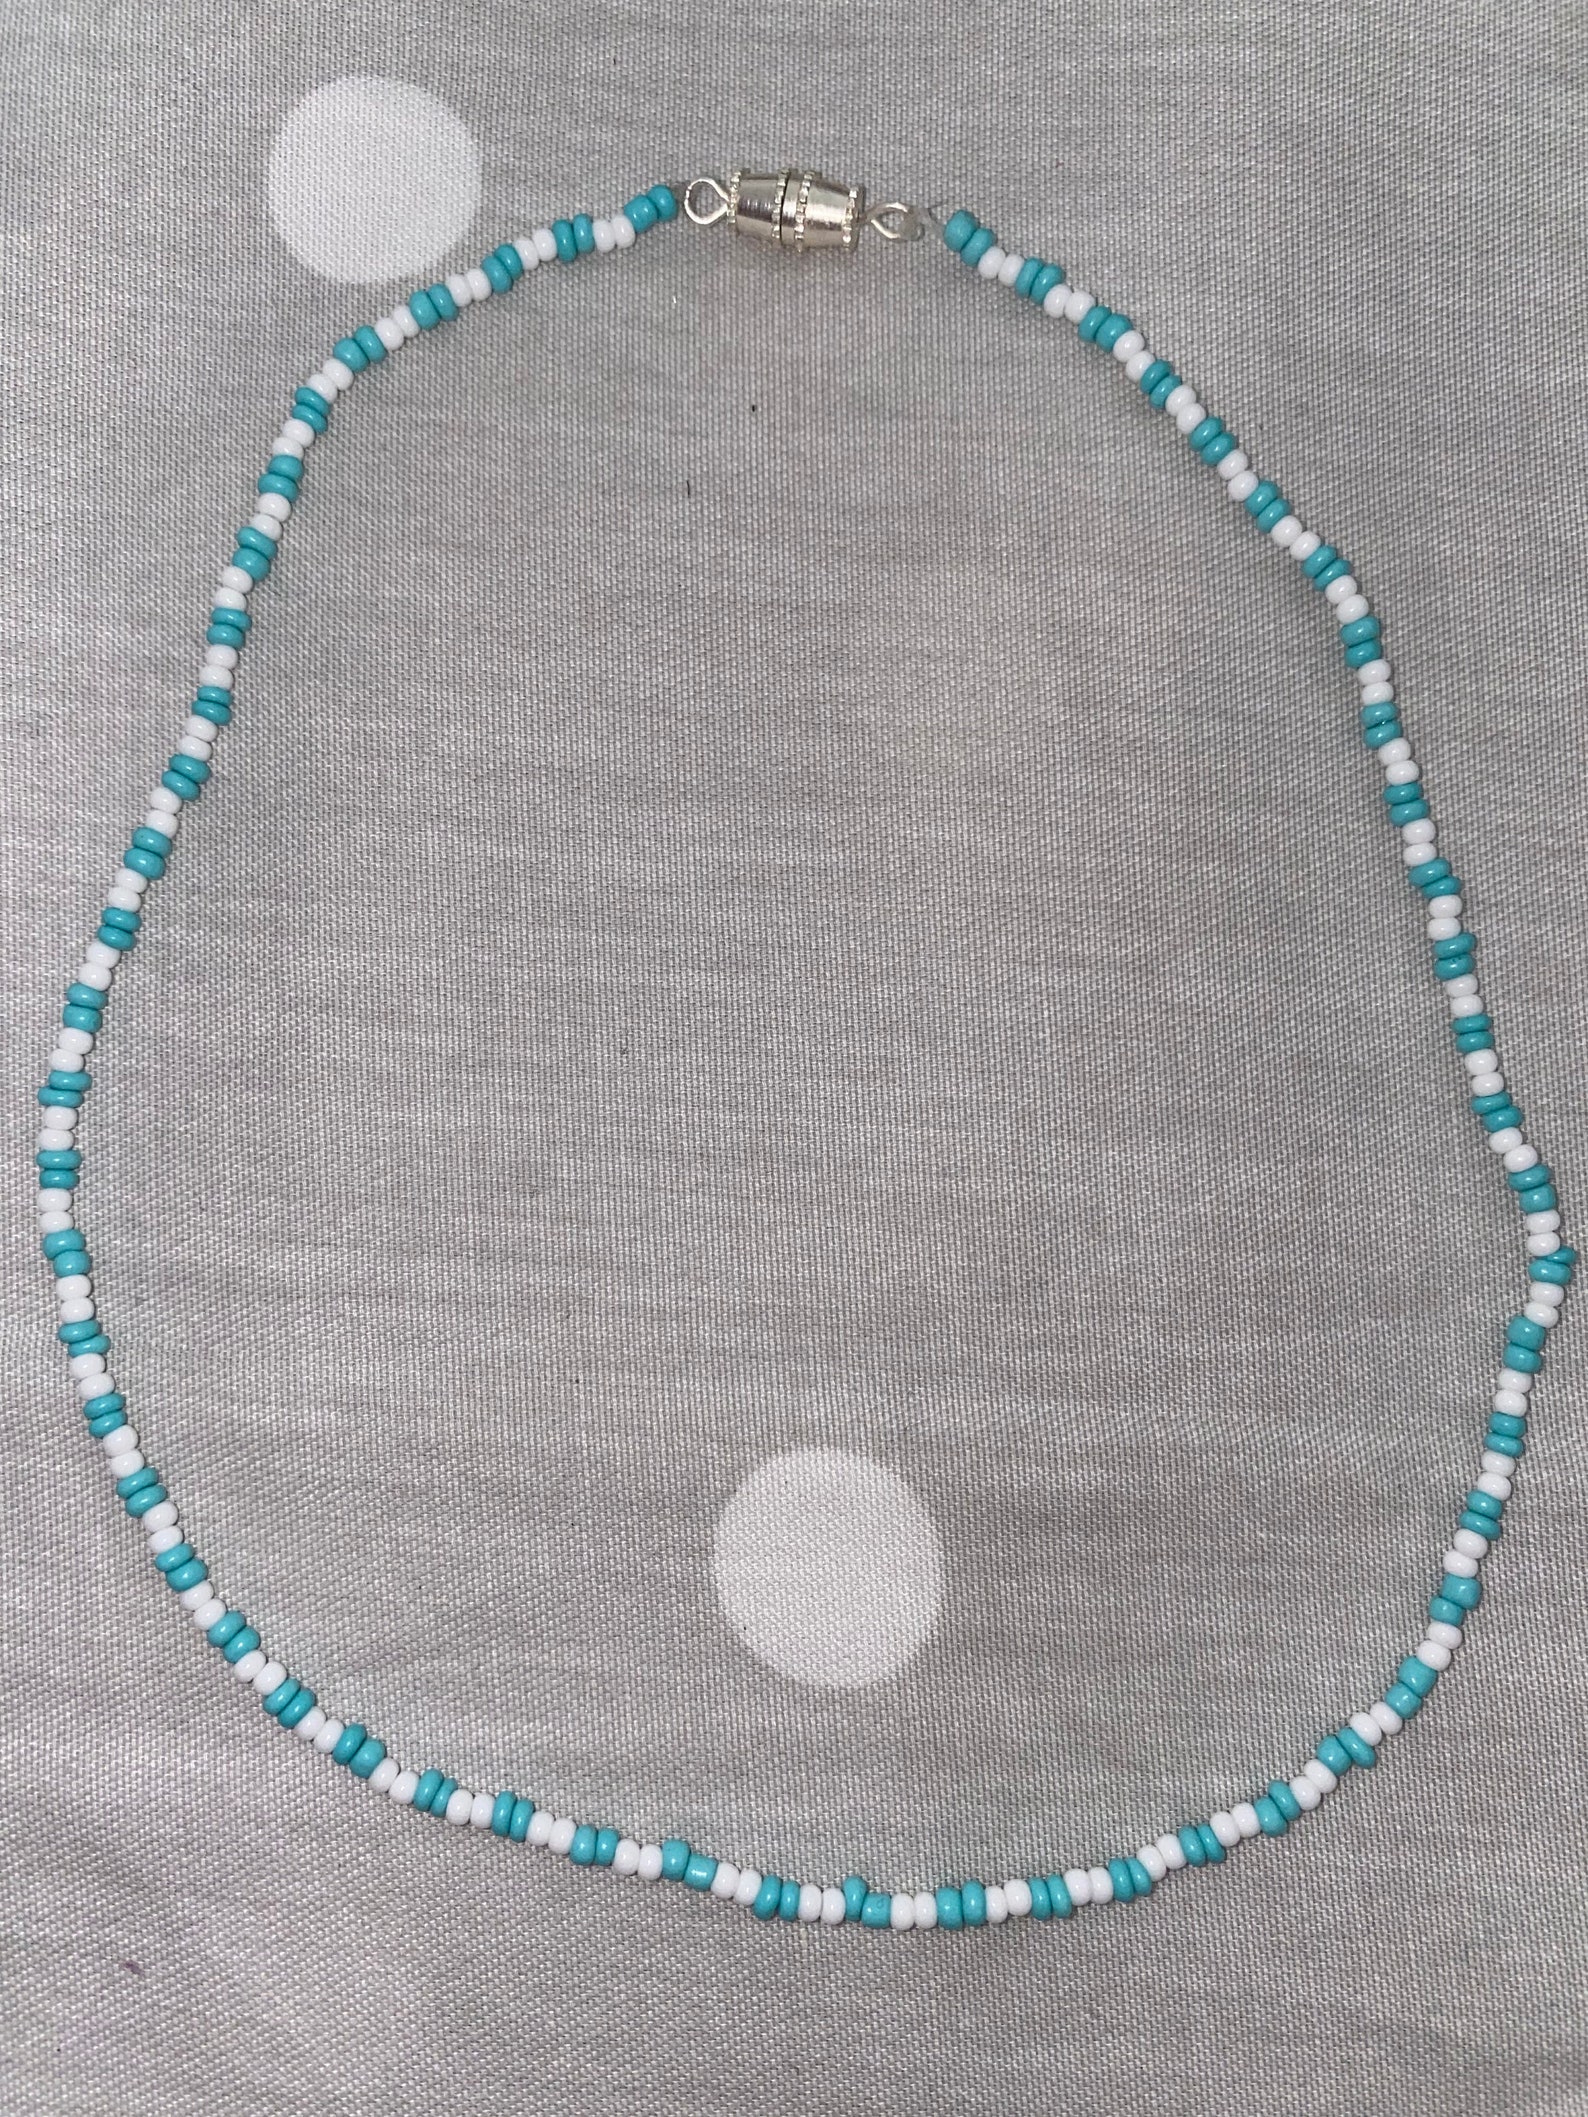 Light Blue and White Beaded Necklace - Etsy